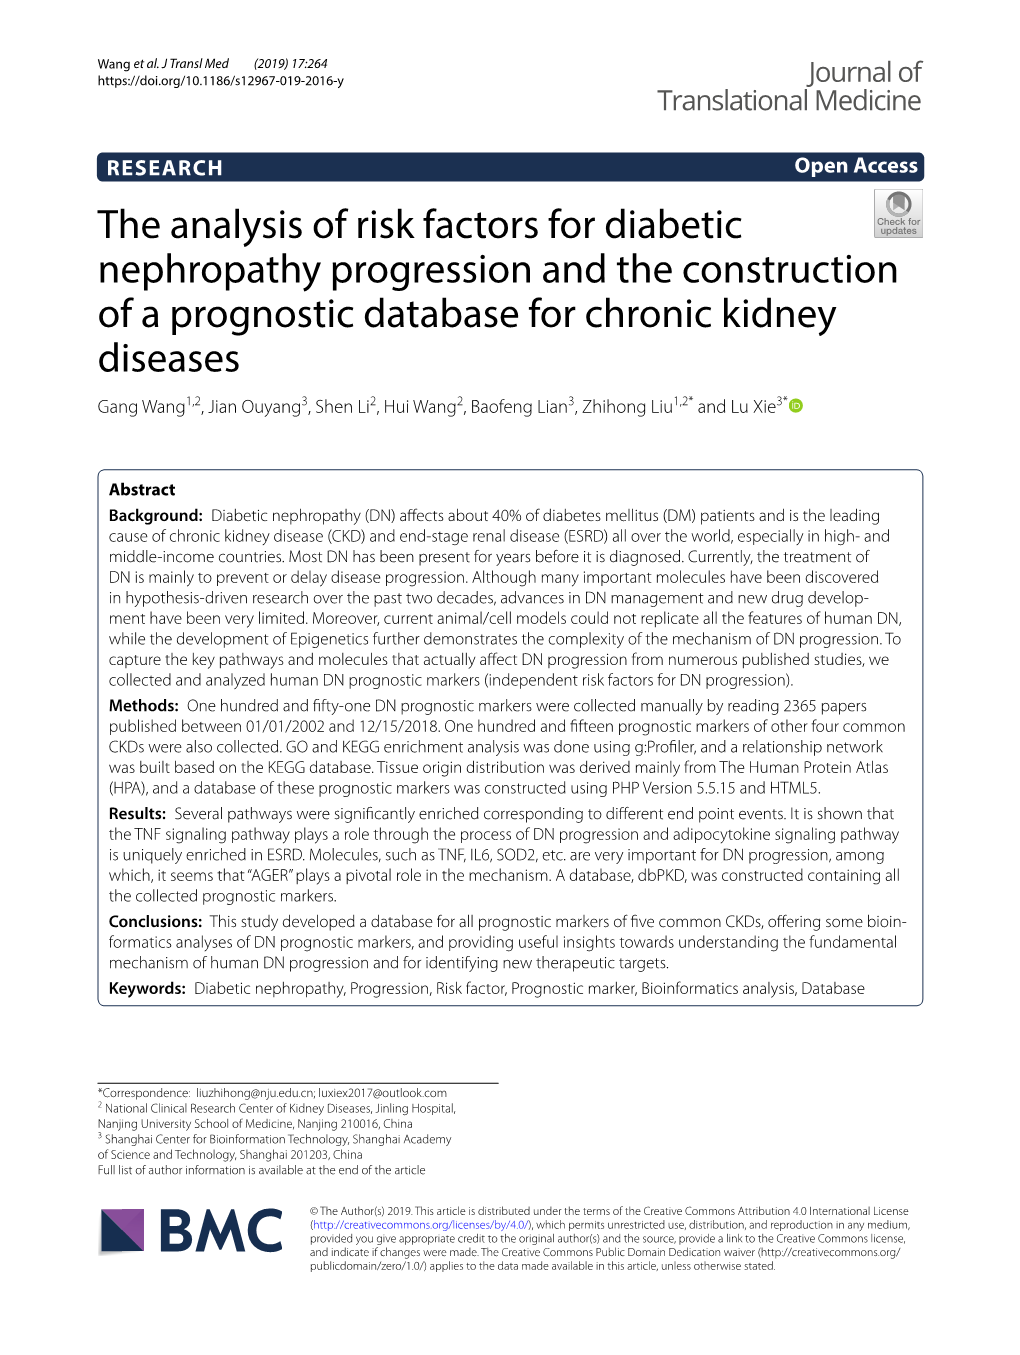 The Analysis of Risk Factors for Diabetic Nephropathy Progression and The